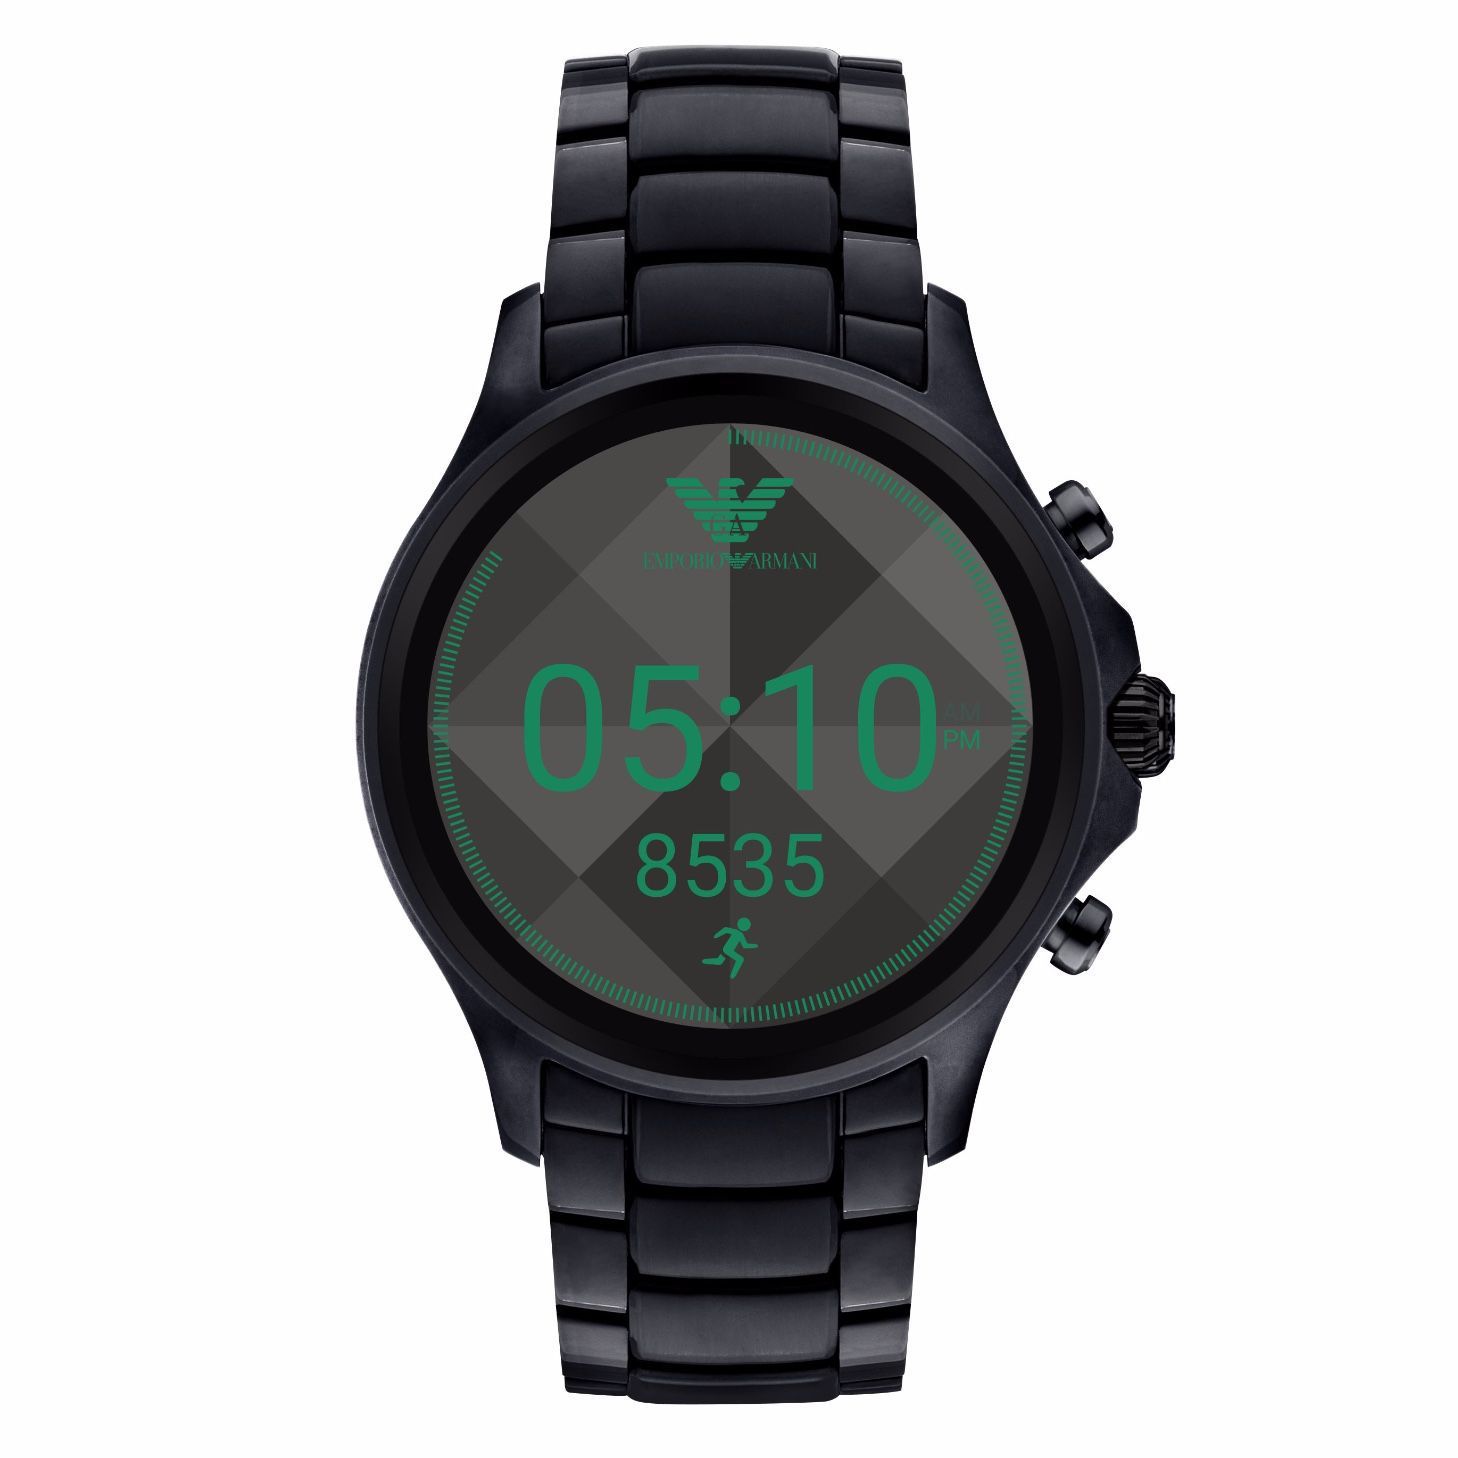 Emporio Armani Connected Android Wear Smartwatch